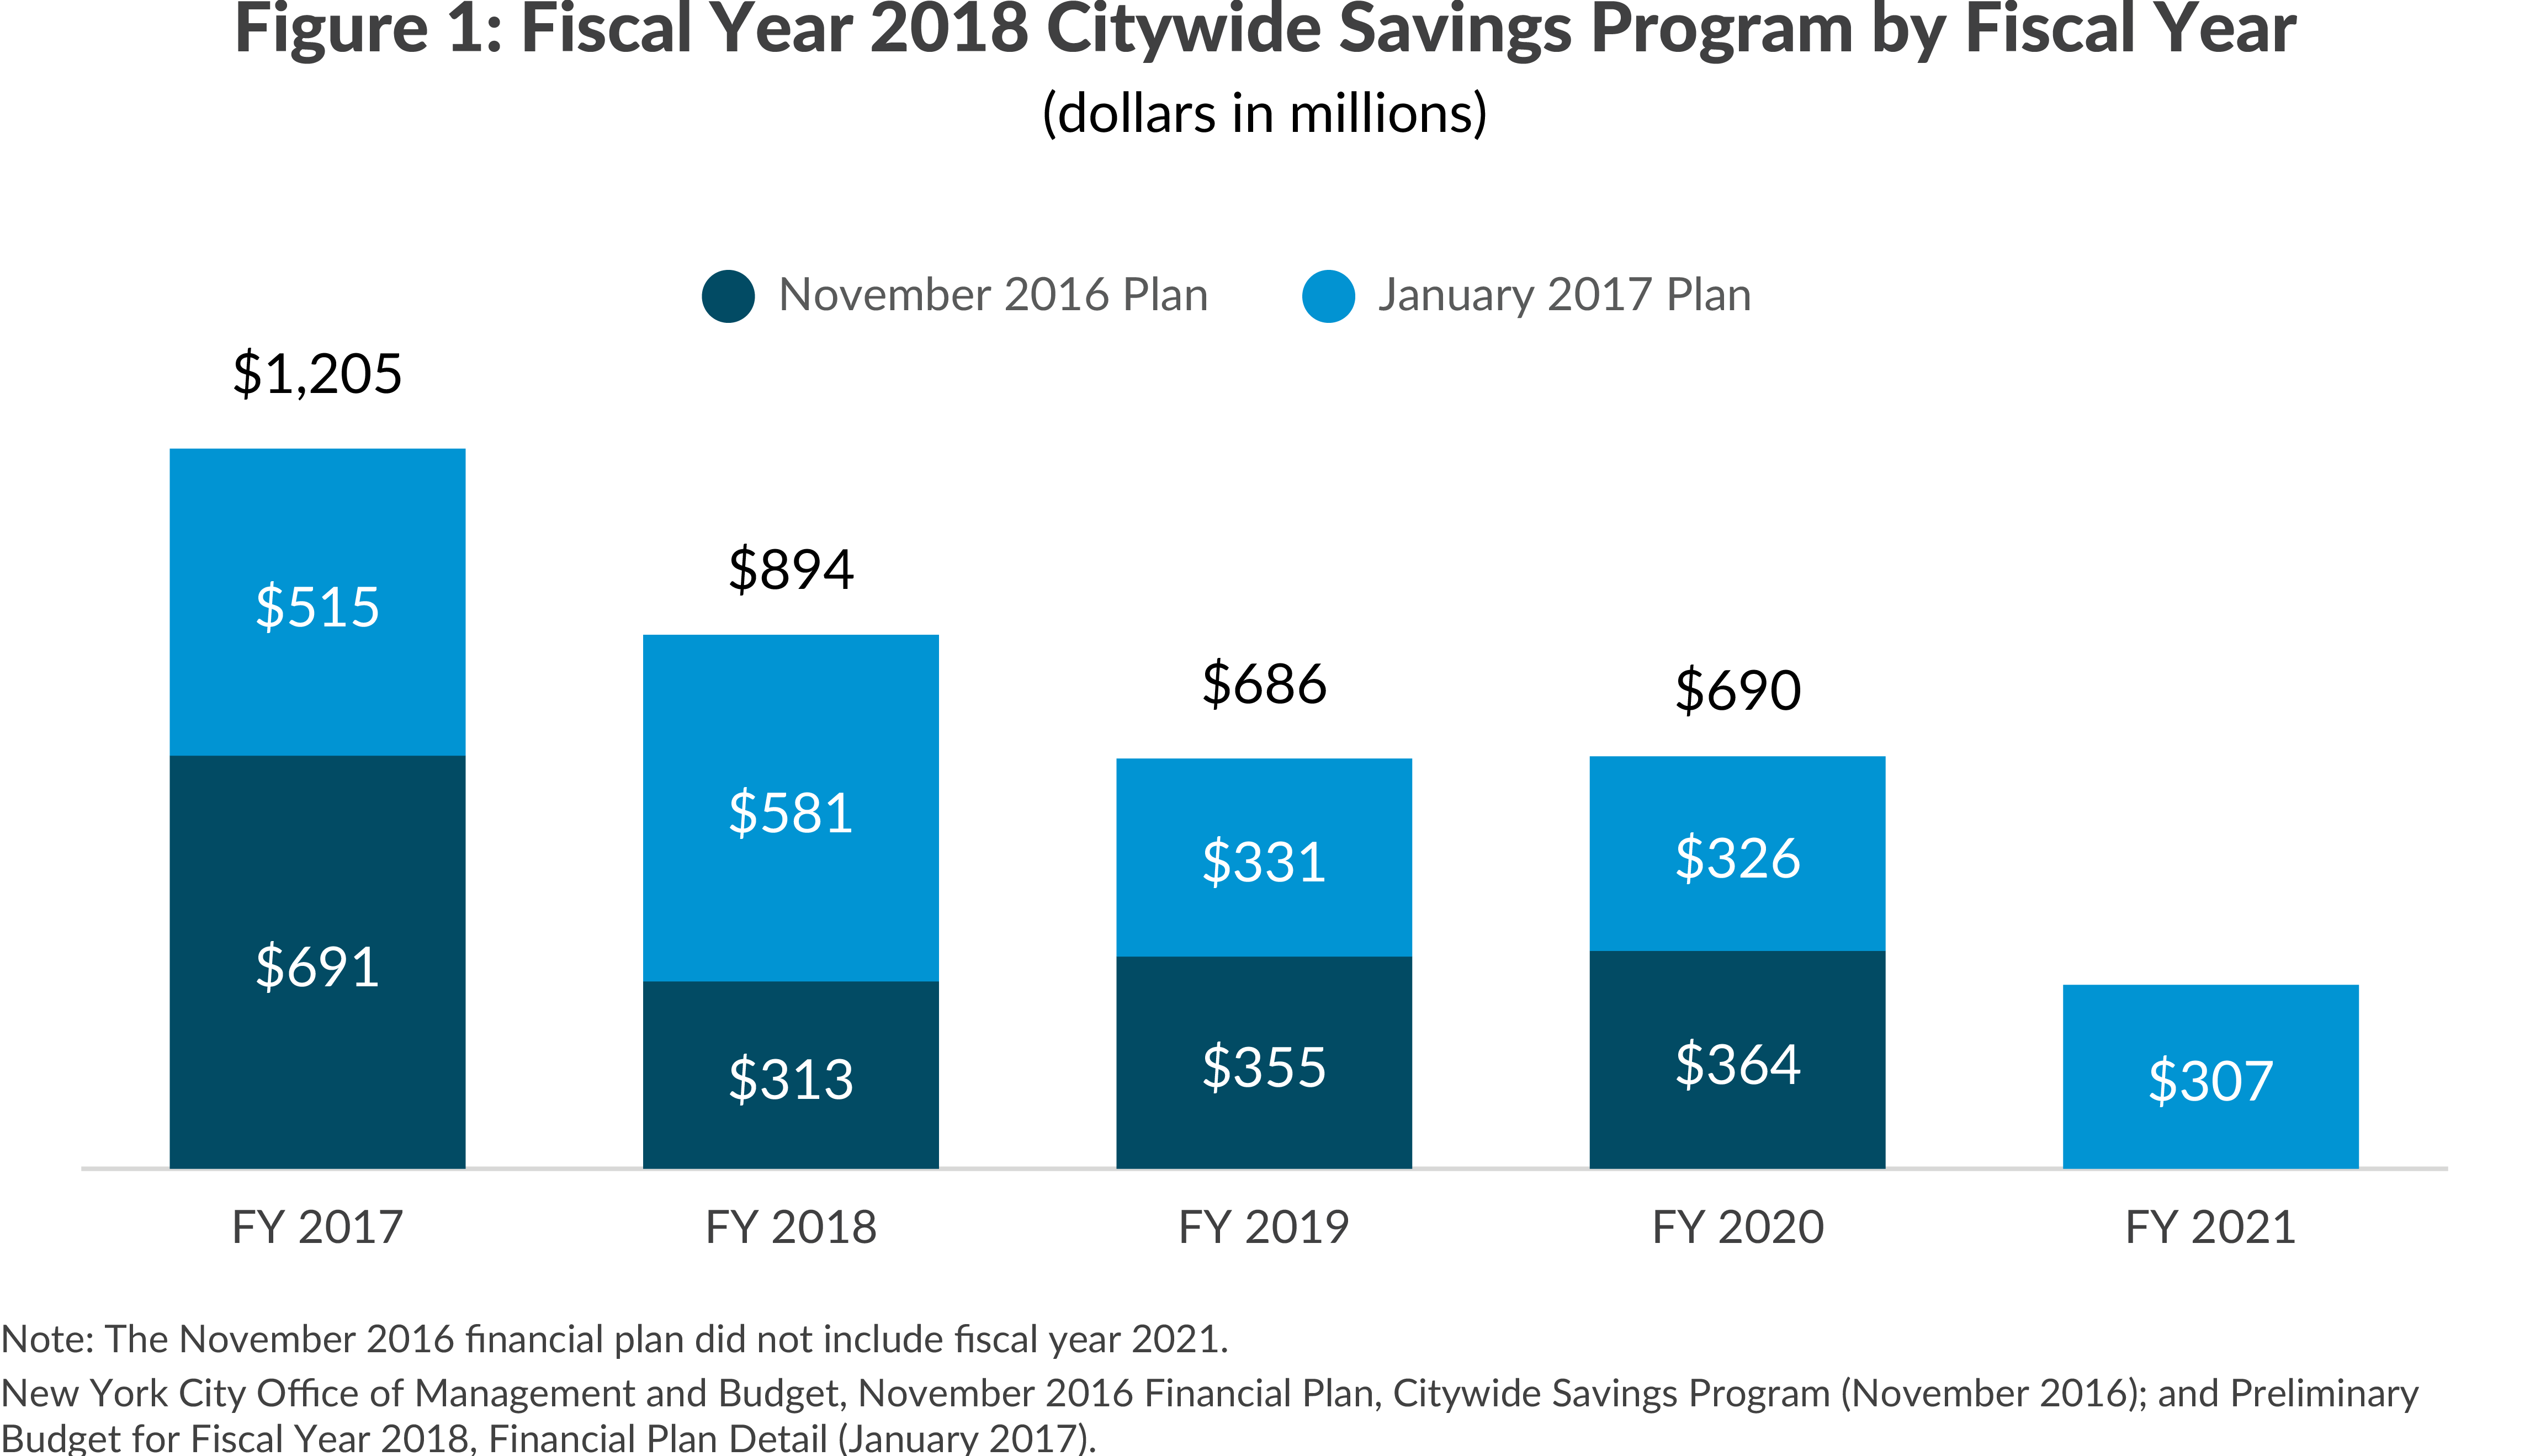 FY2018 Citywide Savings Program by Fiscal Year